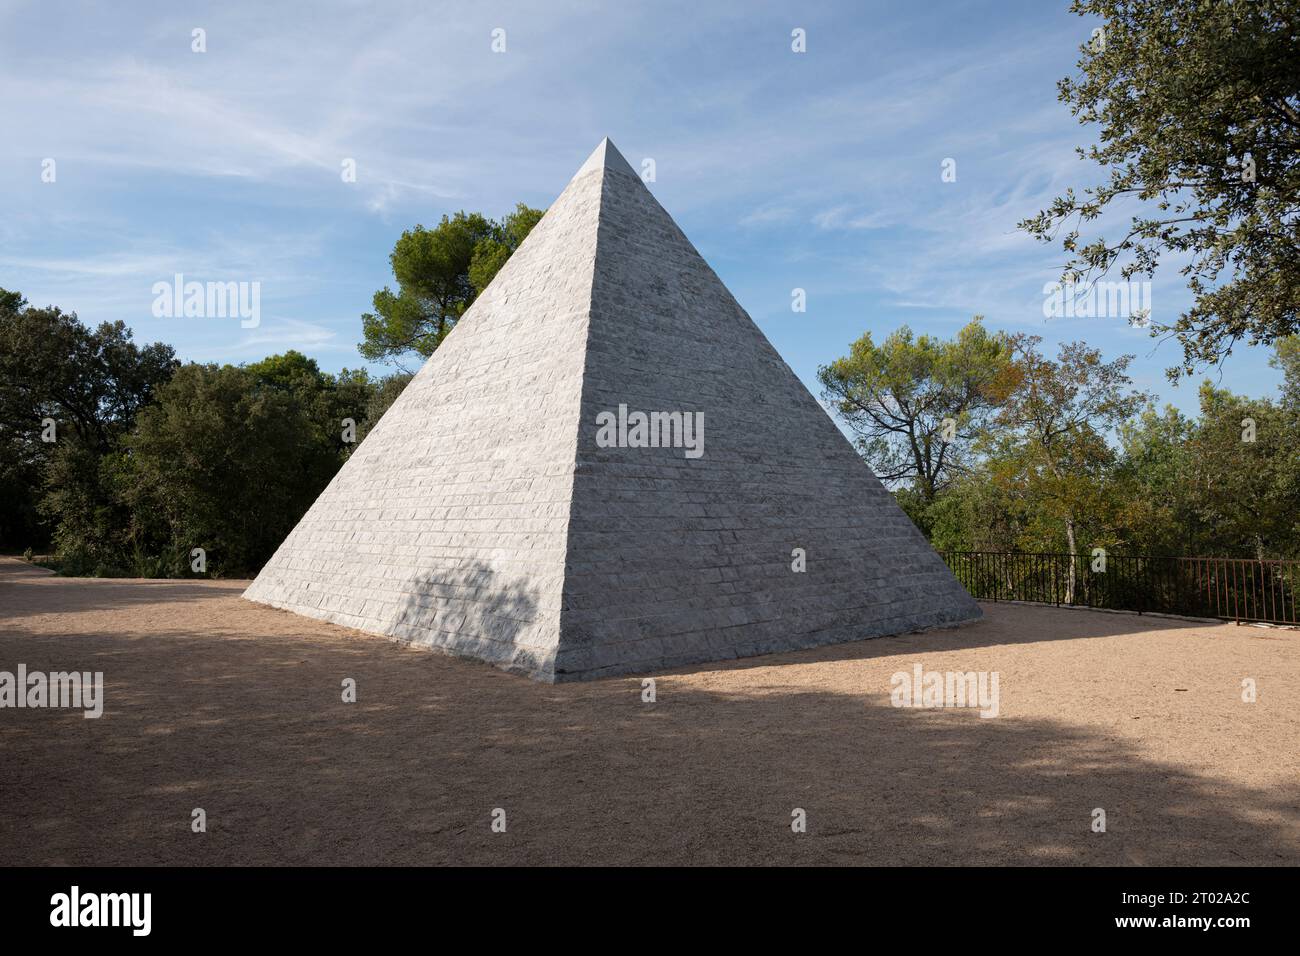 The Tourves Pyramid in Var, France, is a unique 18th-century factory built by Omar de Valbelle.  In 2022, a restoration campaign reinstated its origin Stock Photo